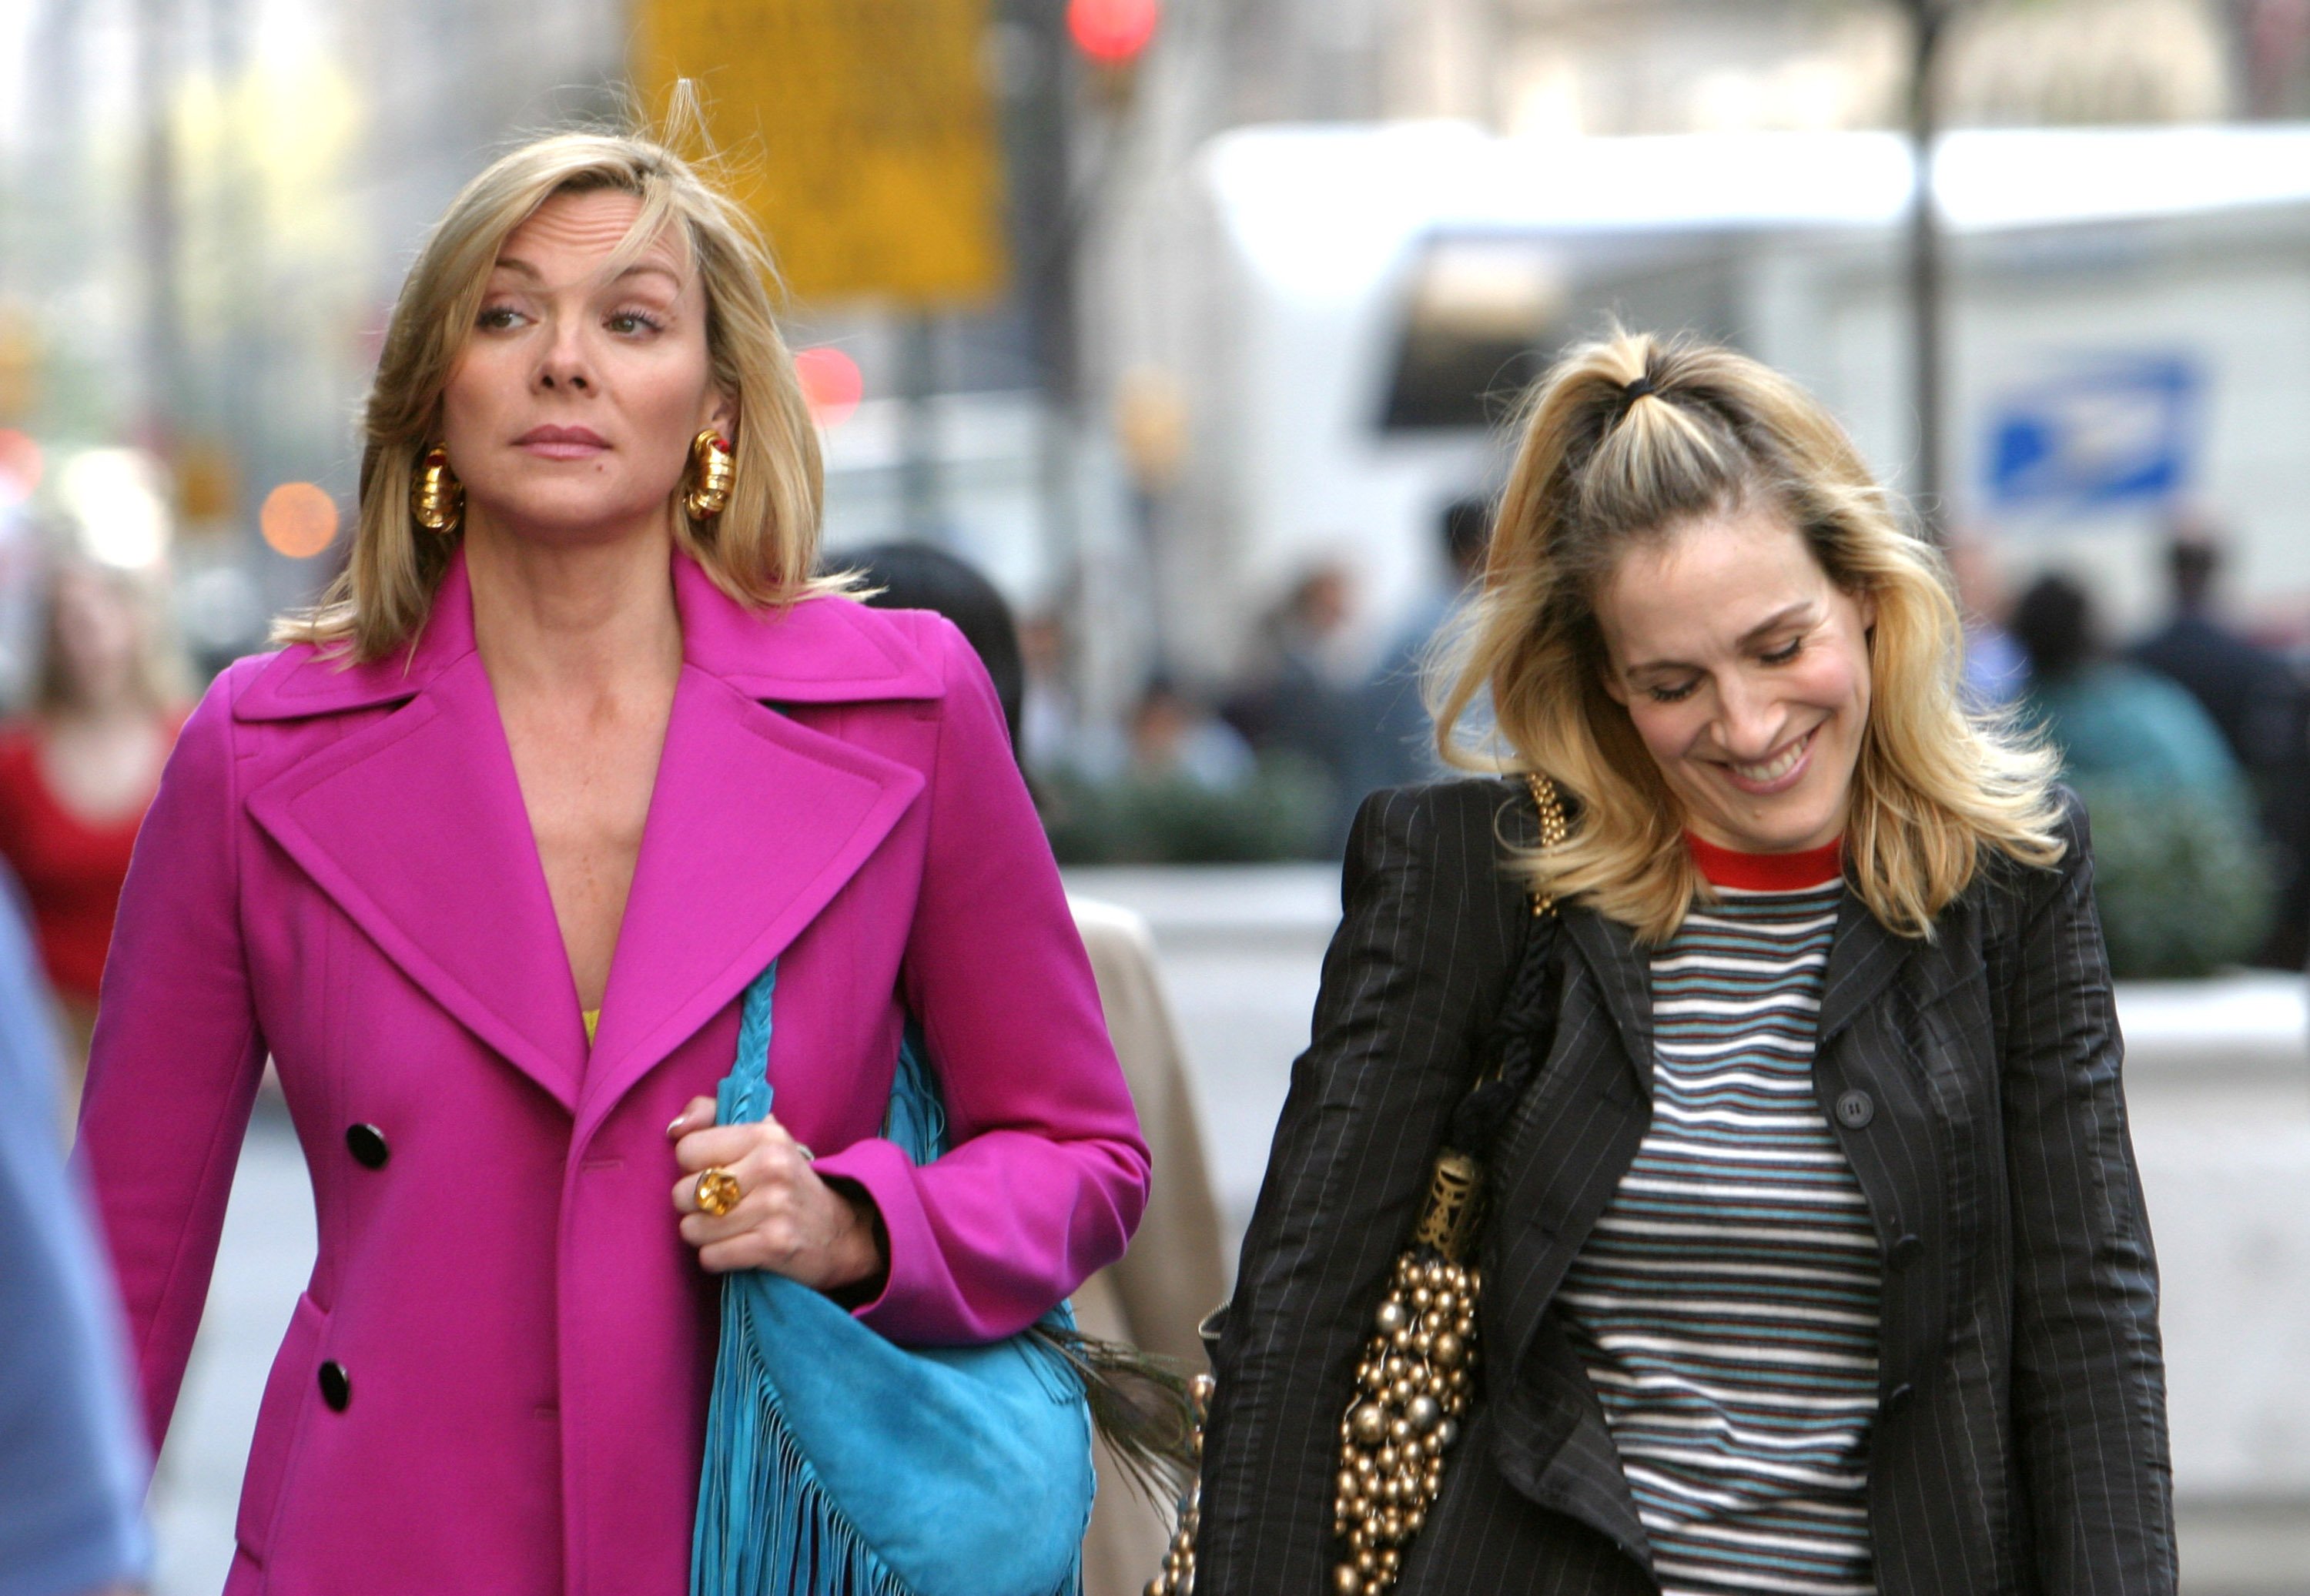 Kim Cattrall and Sarah Jessica Parker walk down a NYC Street while filming 'Sex and the City'